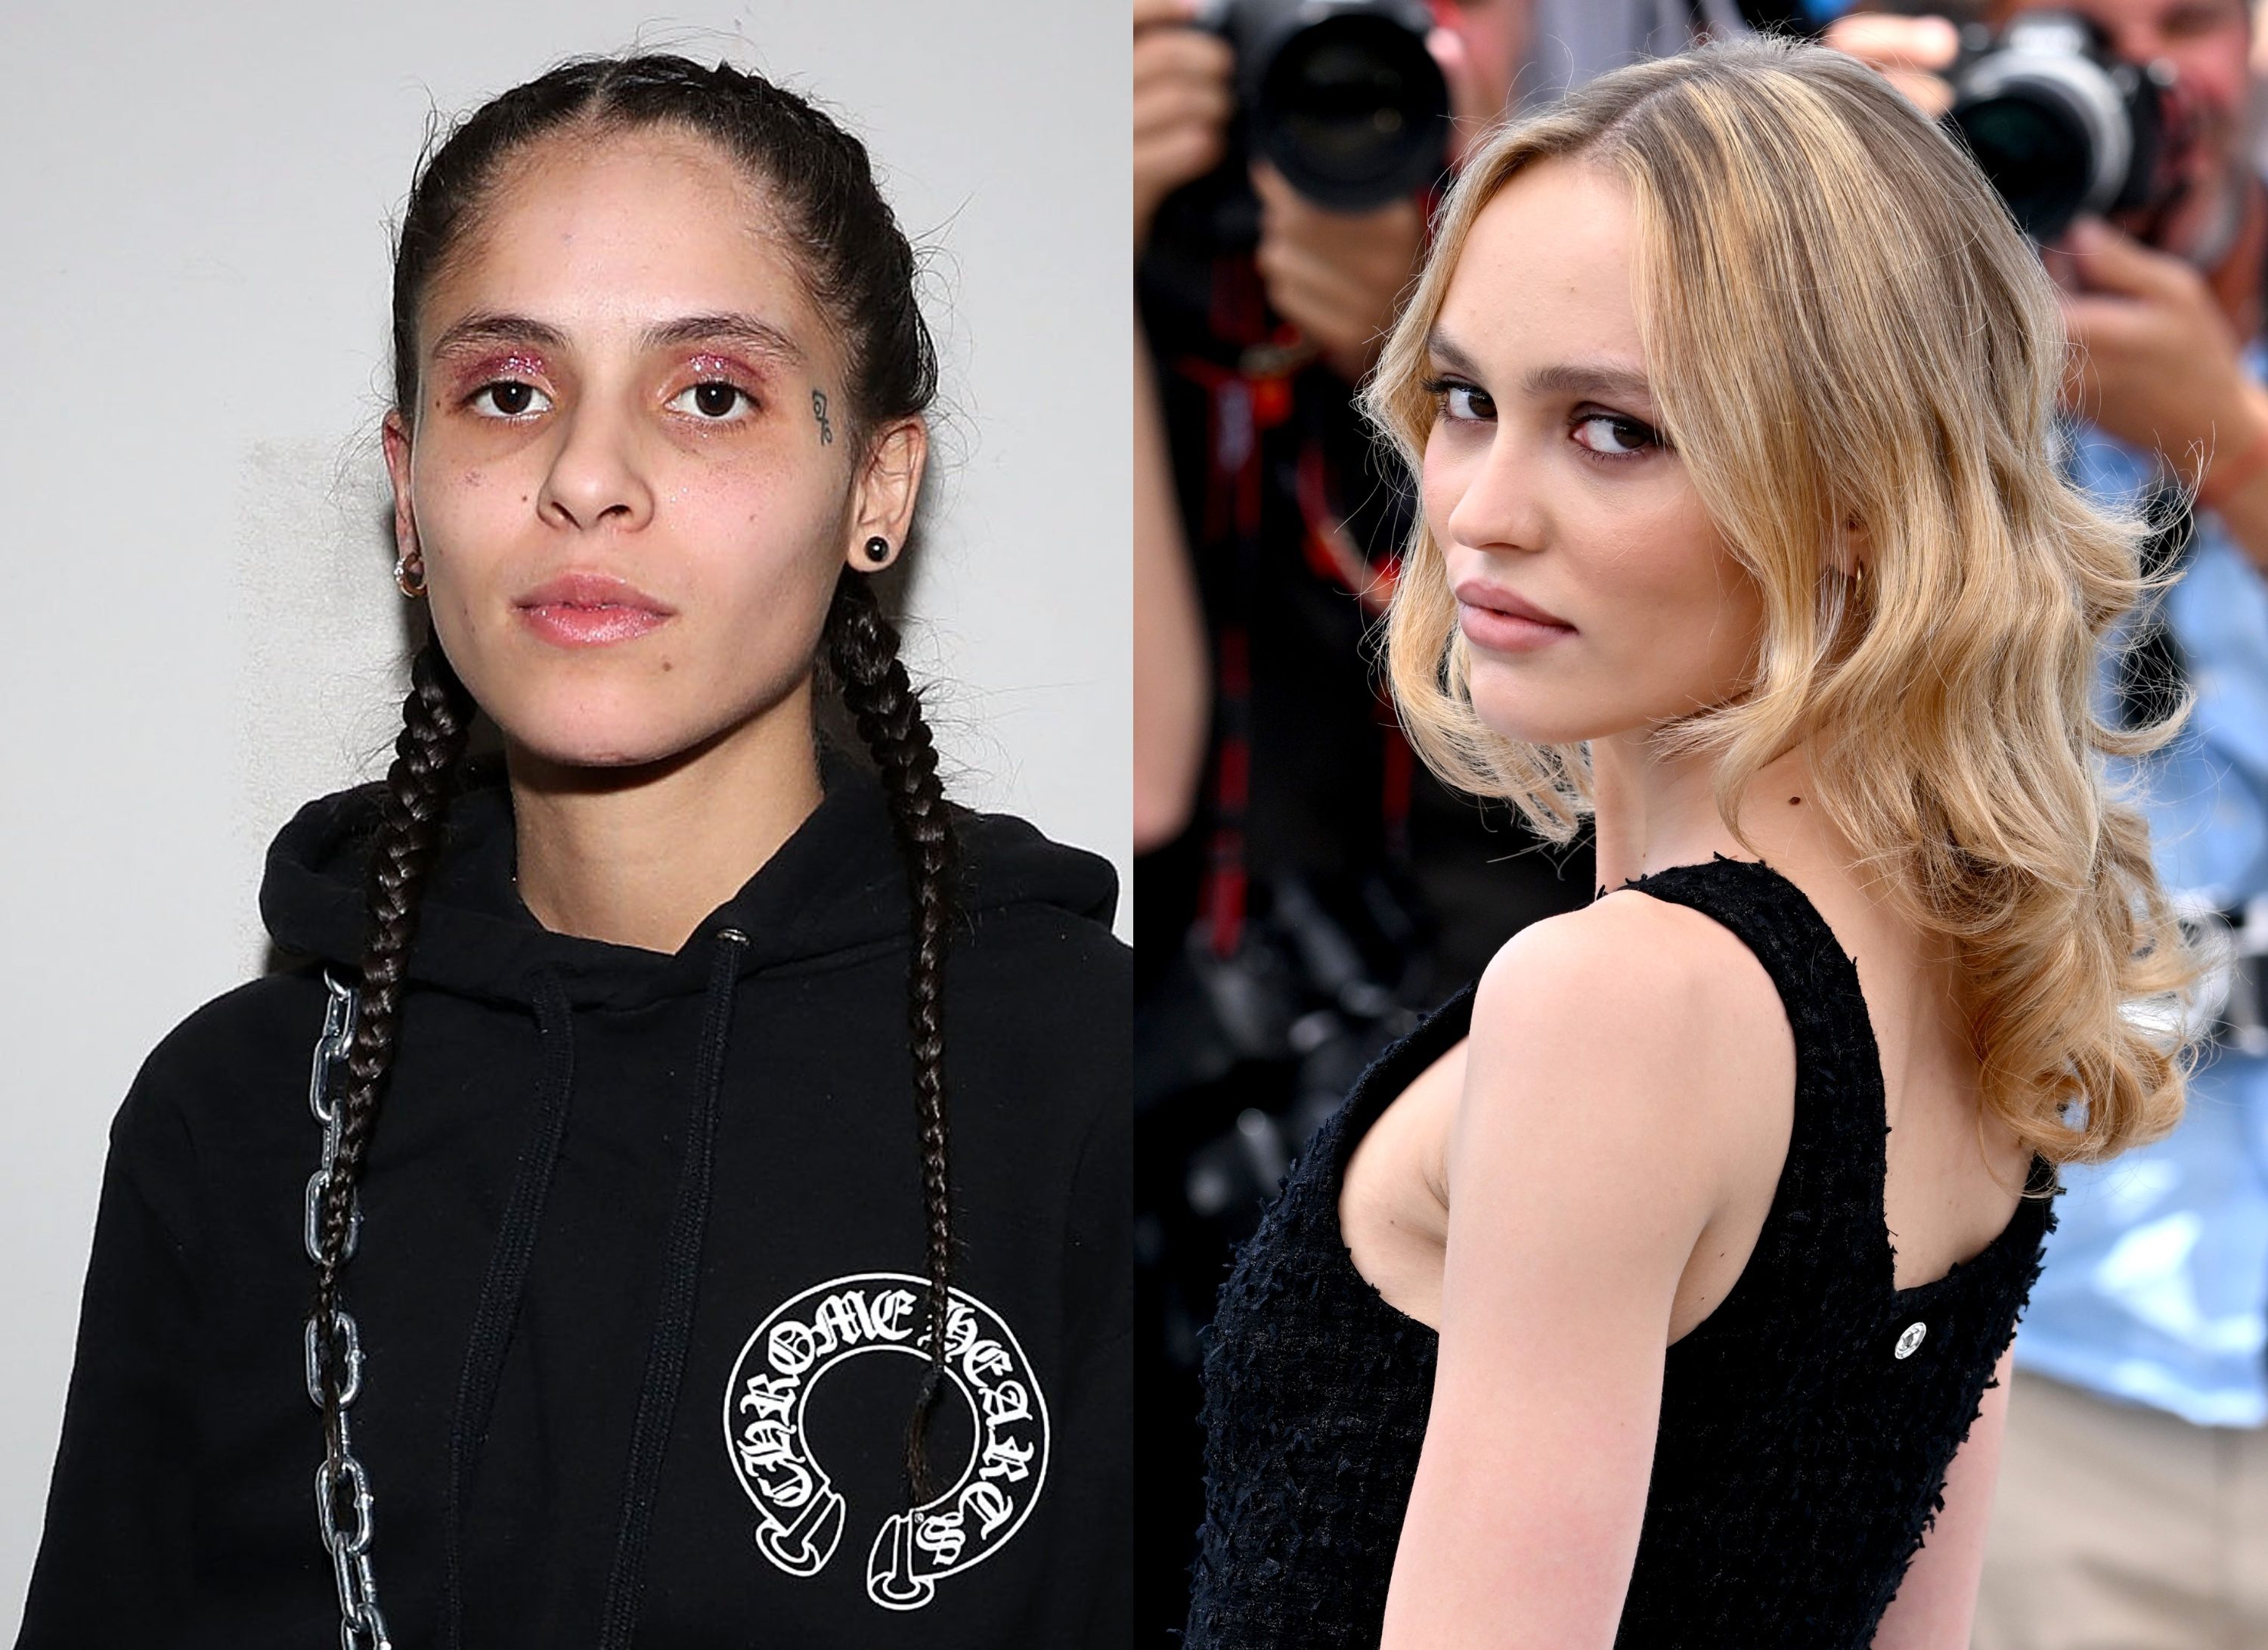 Lily-Rose Depp Shows Off PDA With GF 070 Shake Following Controversial “The Idol” Premiere